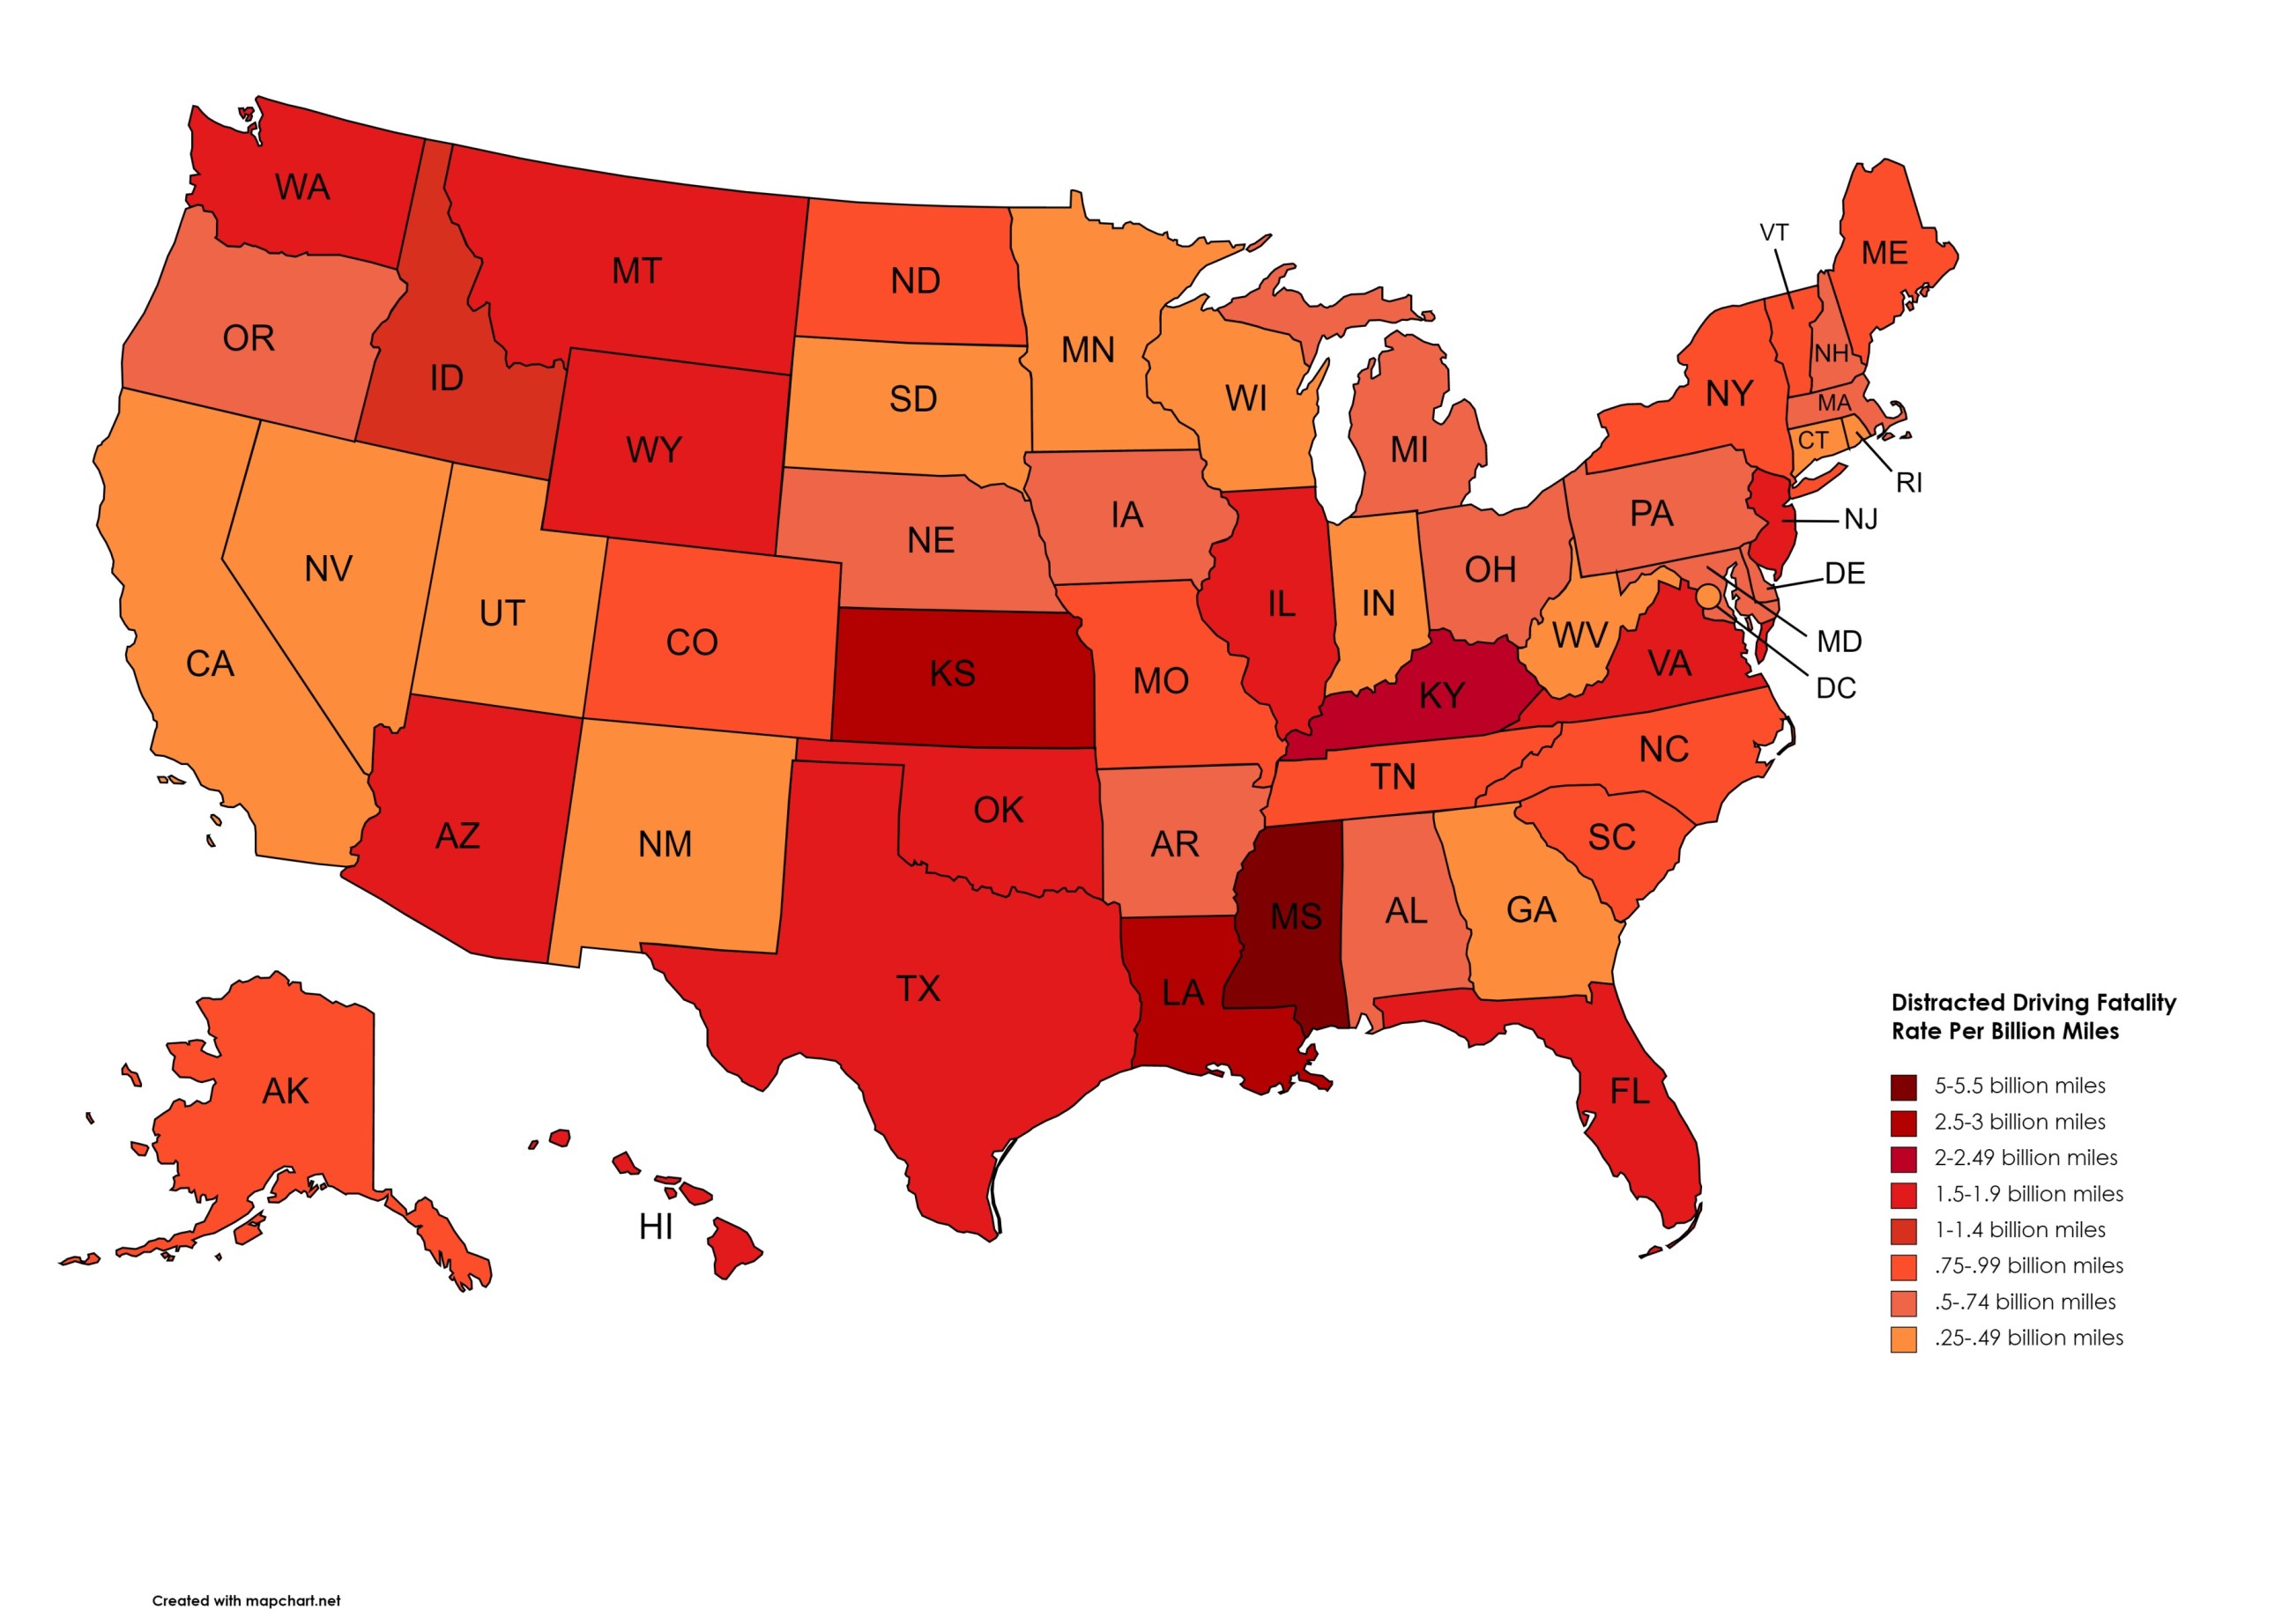 Distracted Driving Fatality Rate Per State